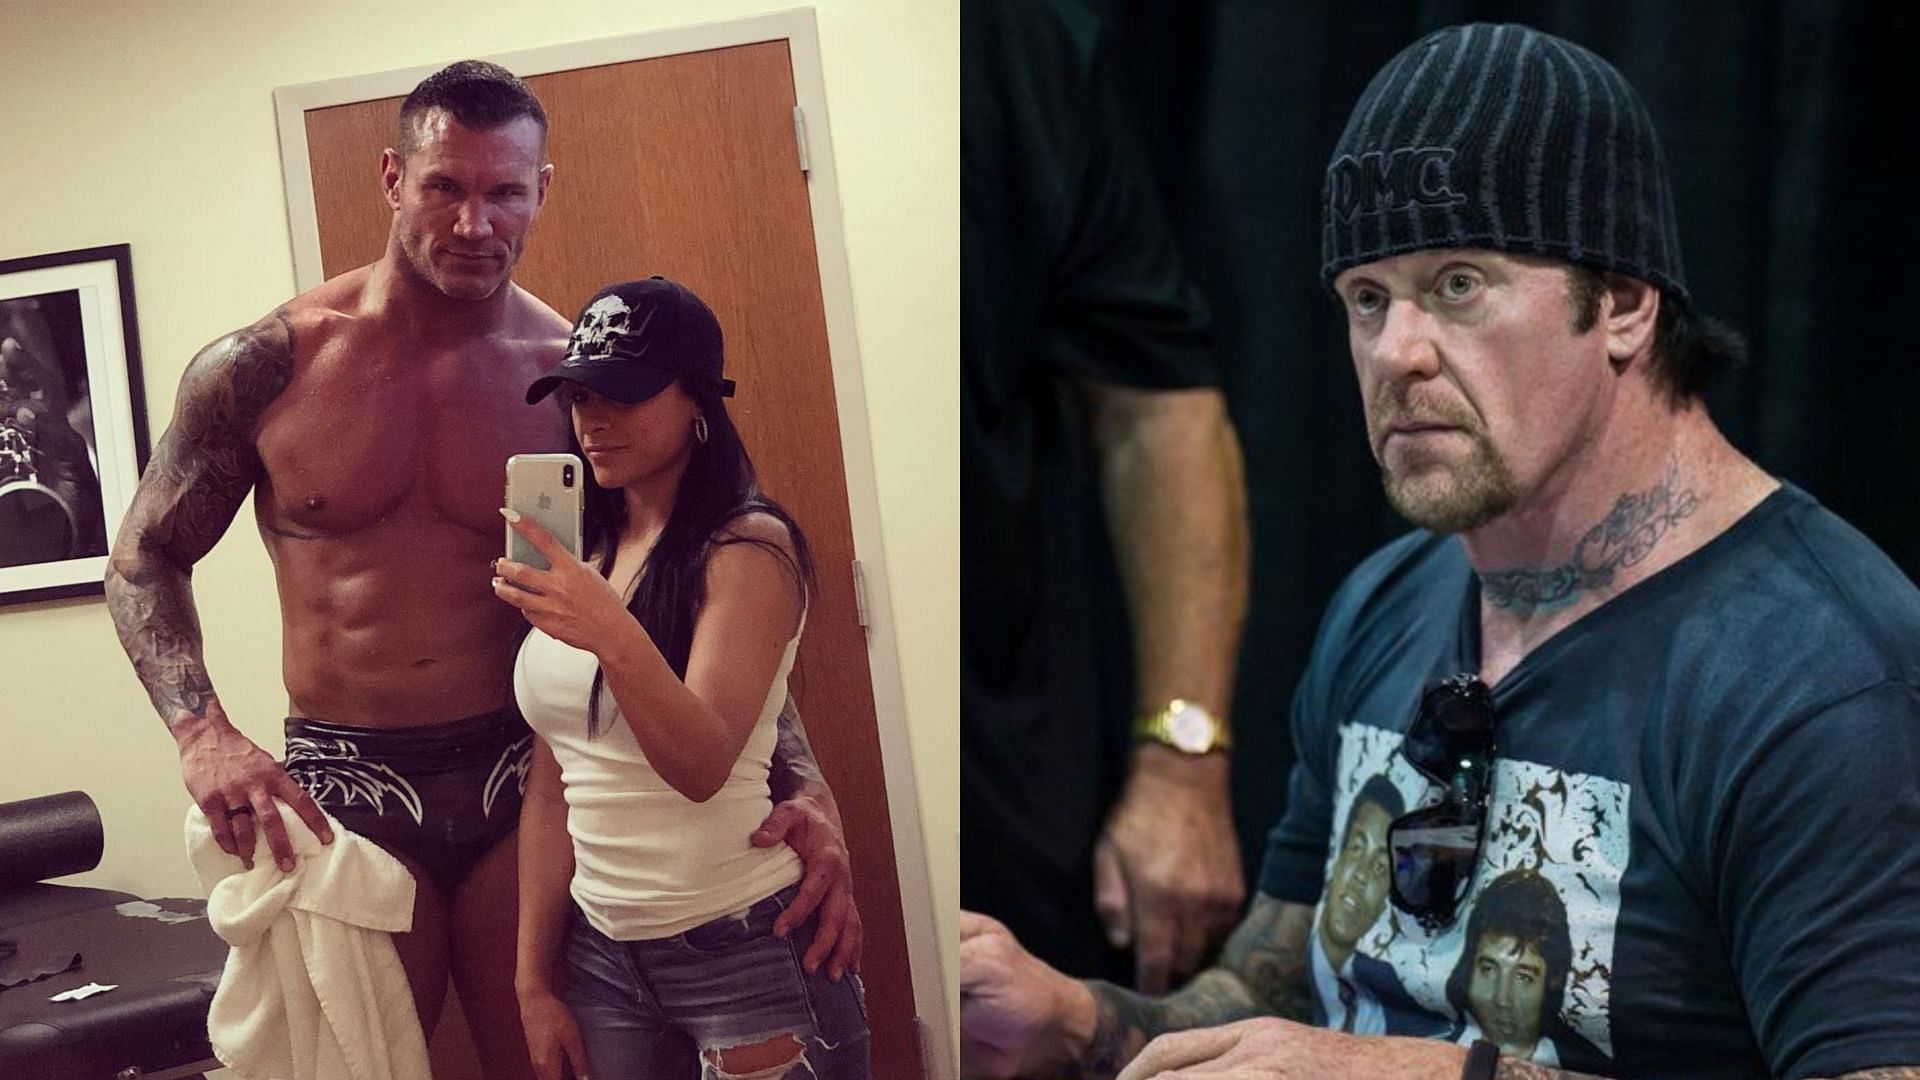 Randy Orton with his wife, Kim (left), and WWE Hall of Famer The Undertaker (right)